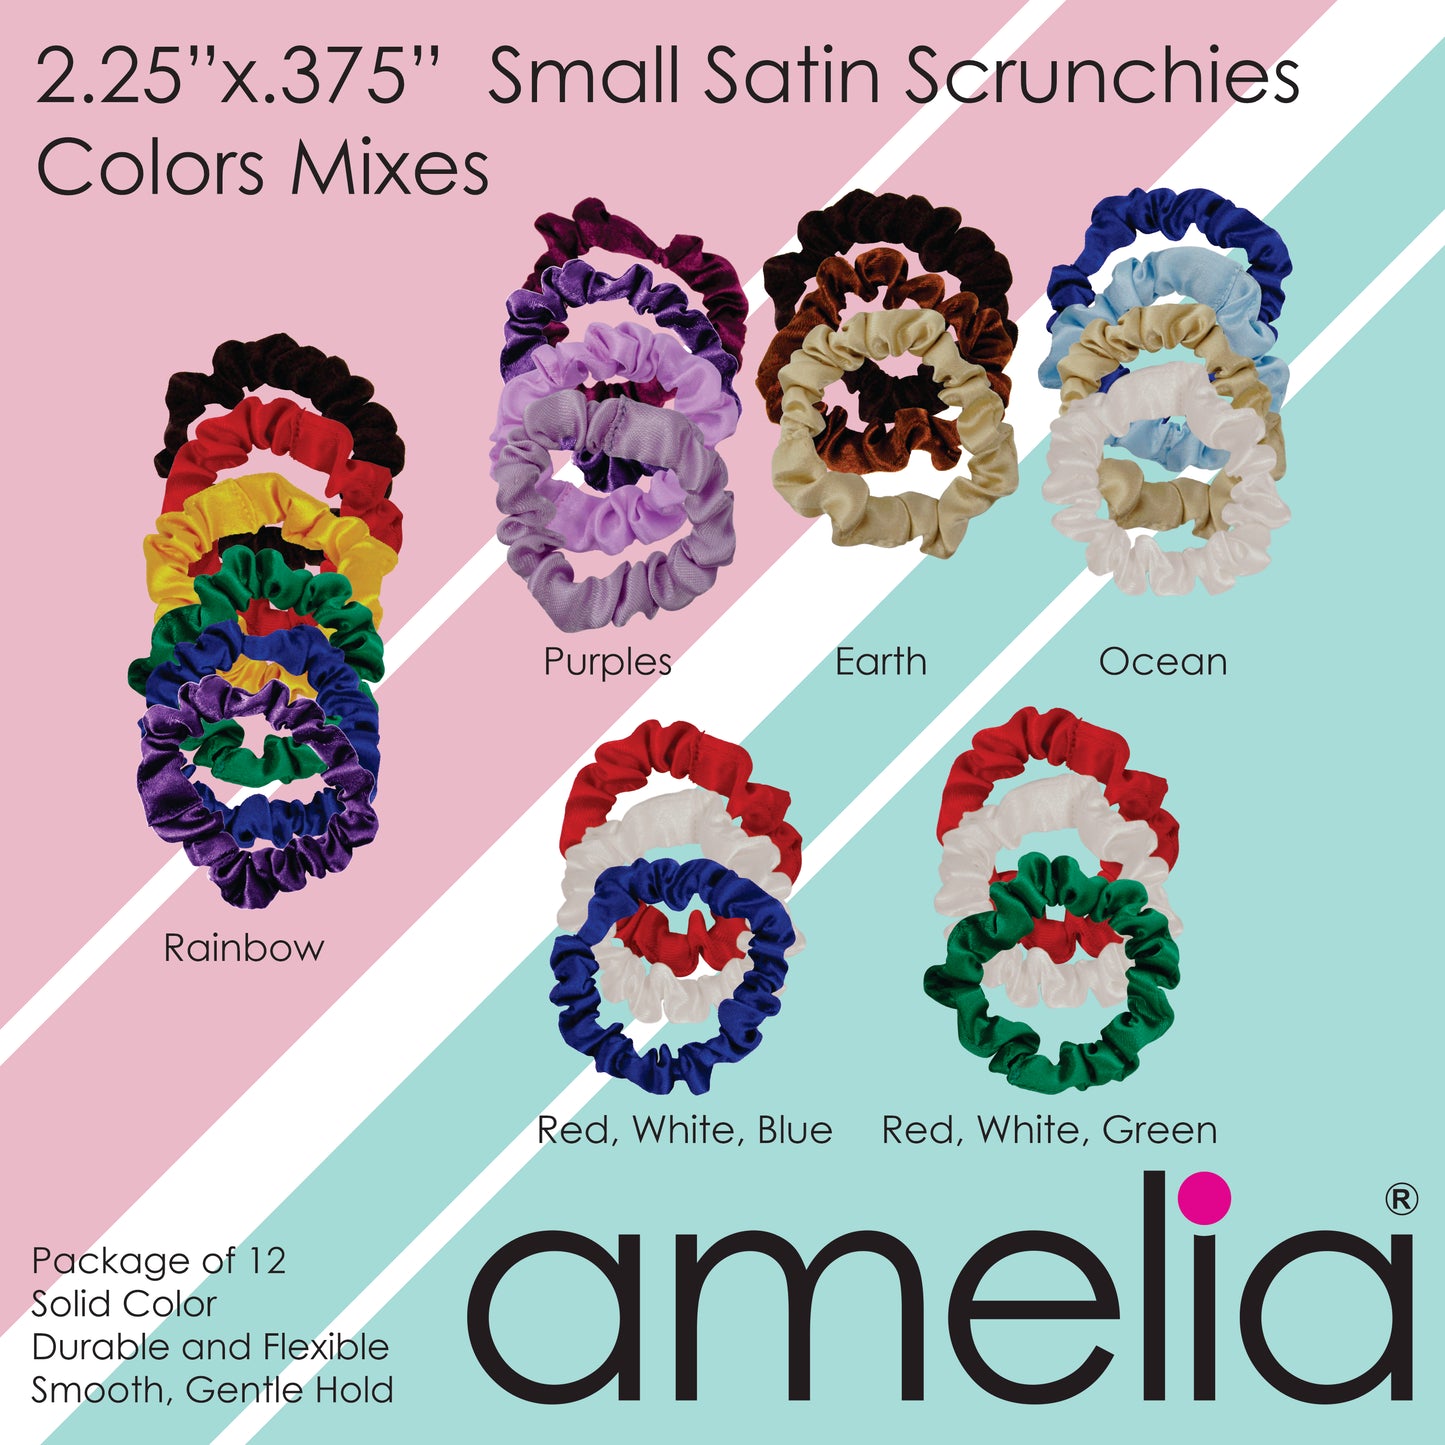 Amelia Beauty, Burgundy Satin Scrunchies, 2.25in Diameter, Gentle on Hair, Strong Hold, No Snag, No Dents or Creases. 12 Pack